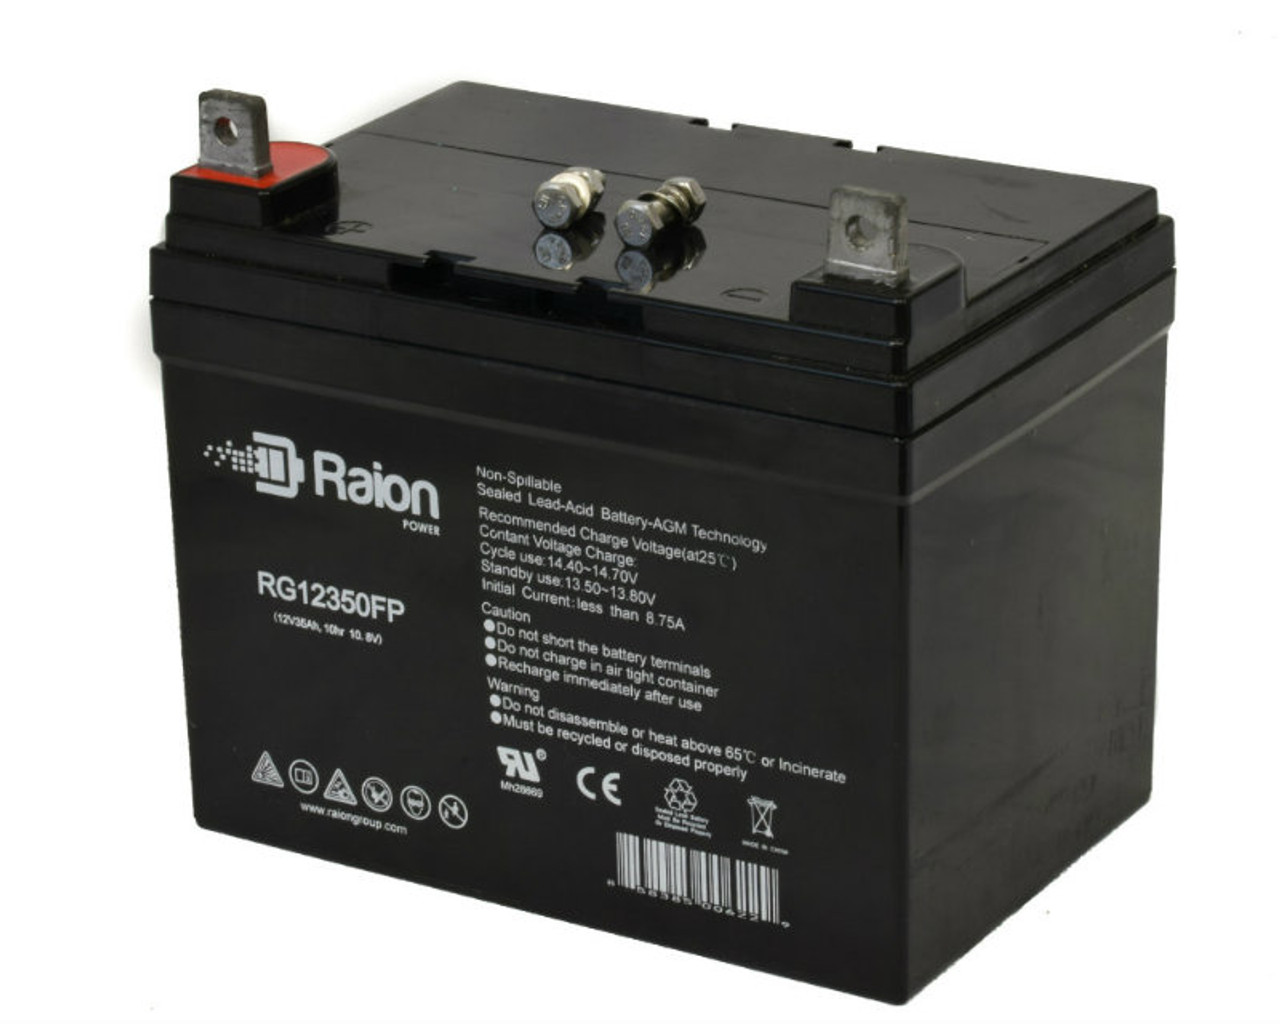 Raion Power Replacement 12V 35Ah RG12350FP Battery for LongWay 6FM33S